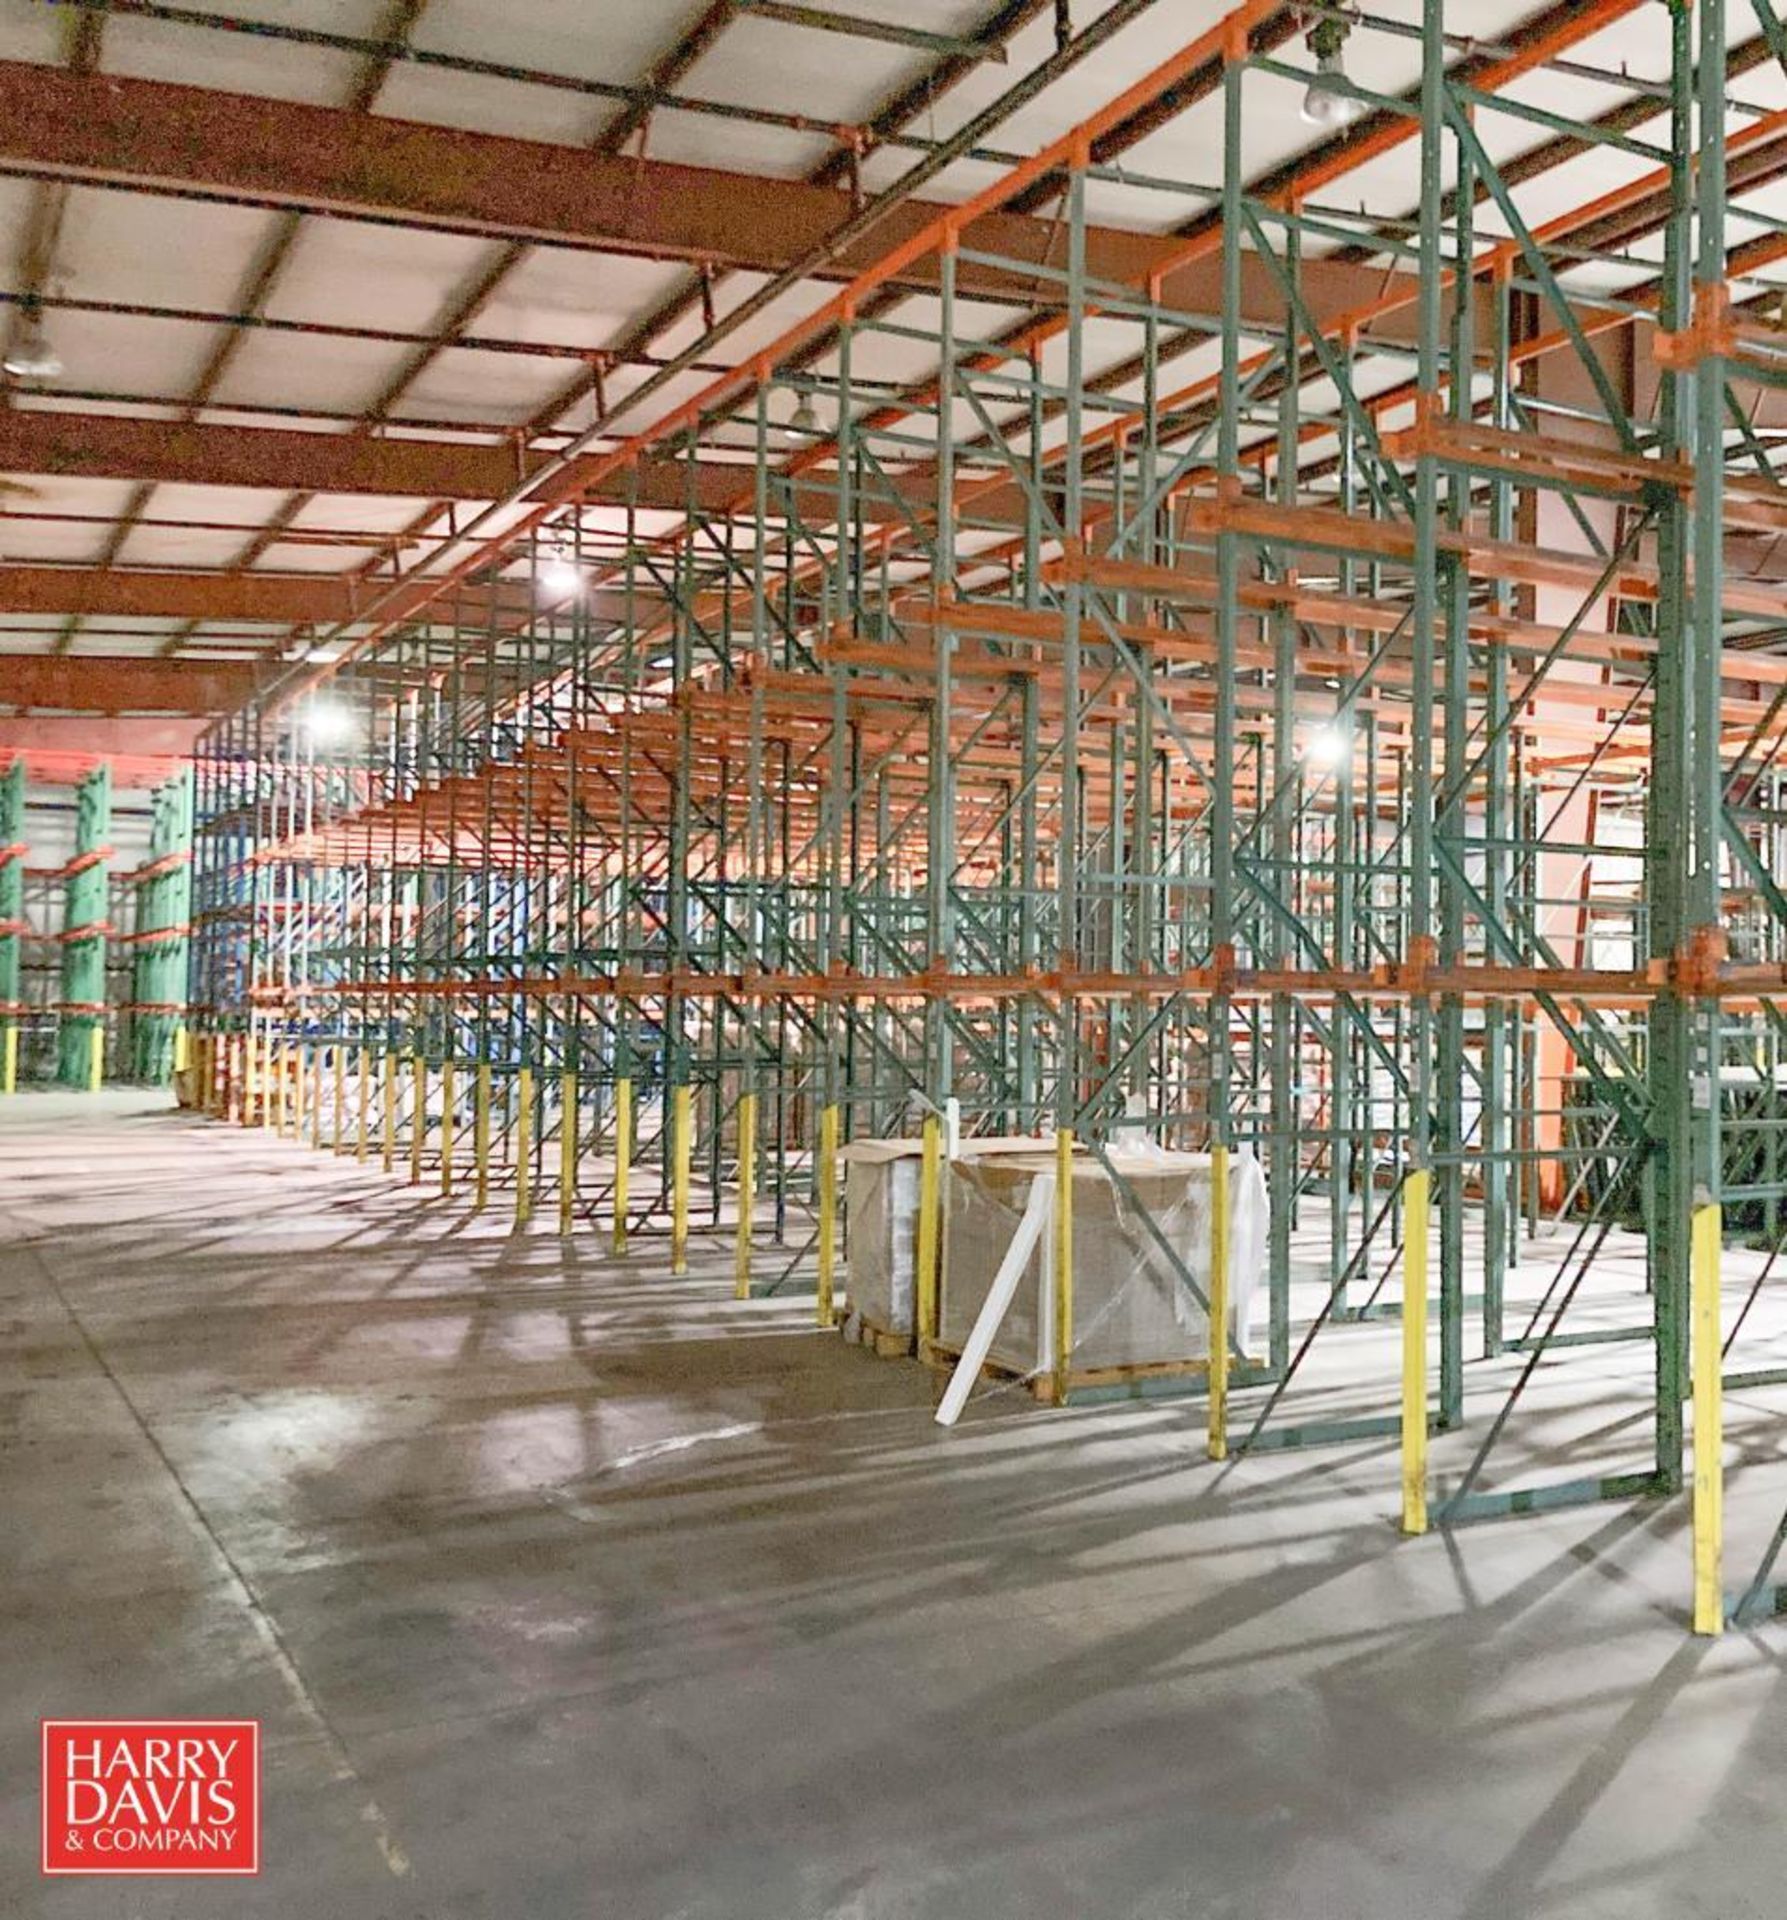 Bays, Drive-In Pallet Racking, 3 High - 18 Pallet Spaces Each (Location: Little Rock, AR) - Image 2 of 2